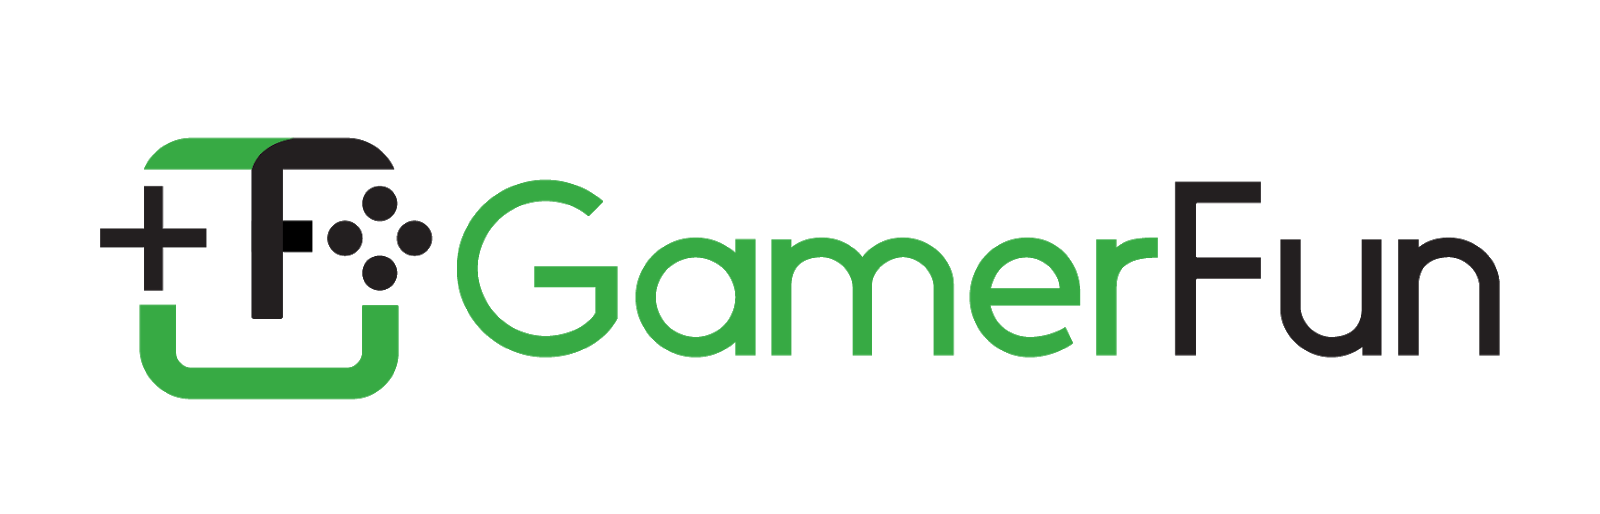 GamerFun - Best Place To Boost Your Gaming Skills 